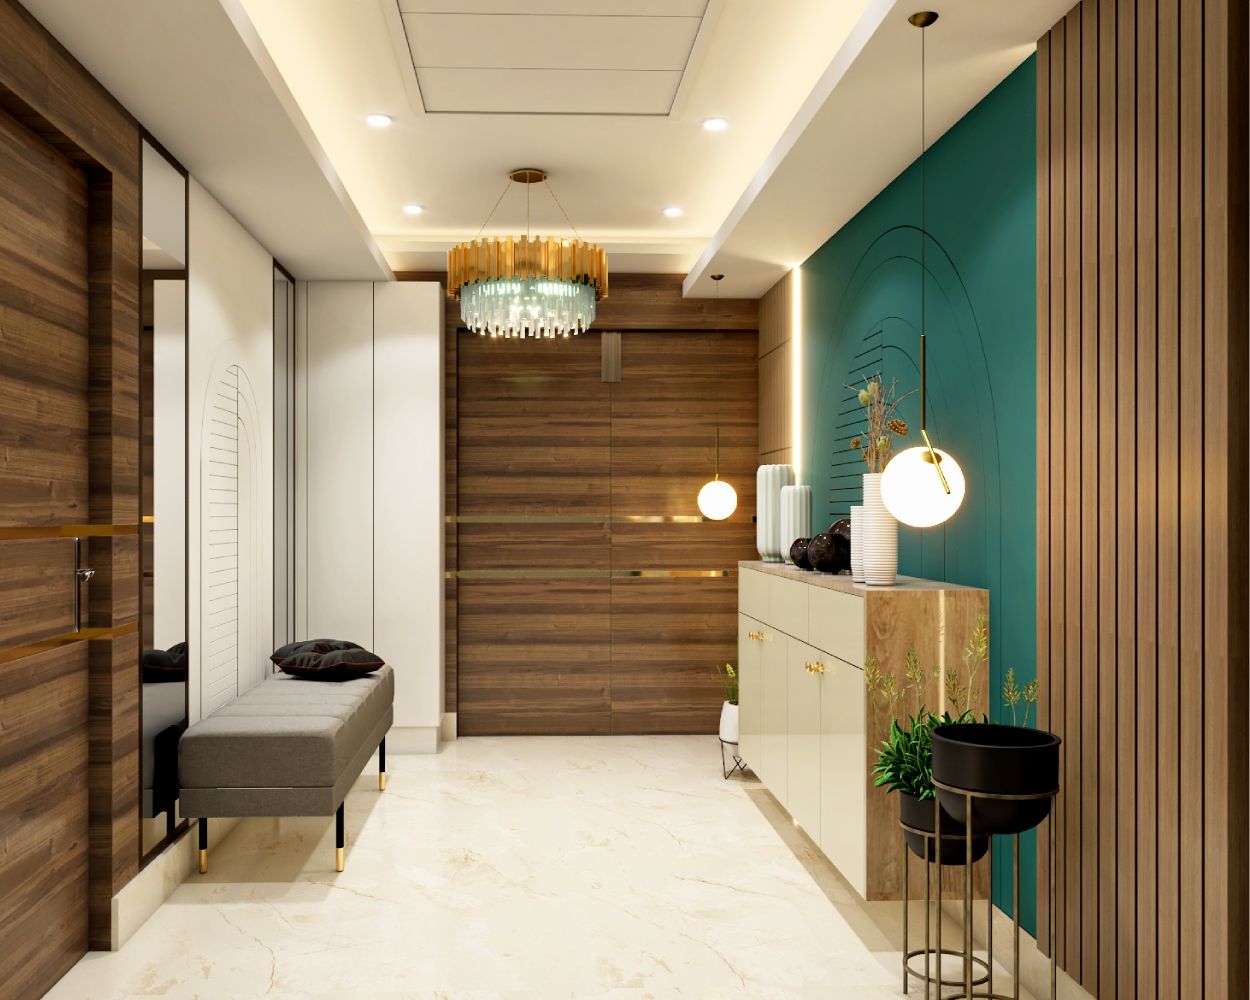 Contemporary Champagne Toned And Teak Foyer Design With Wooden Wall And Mirror